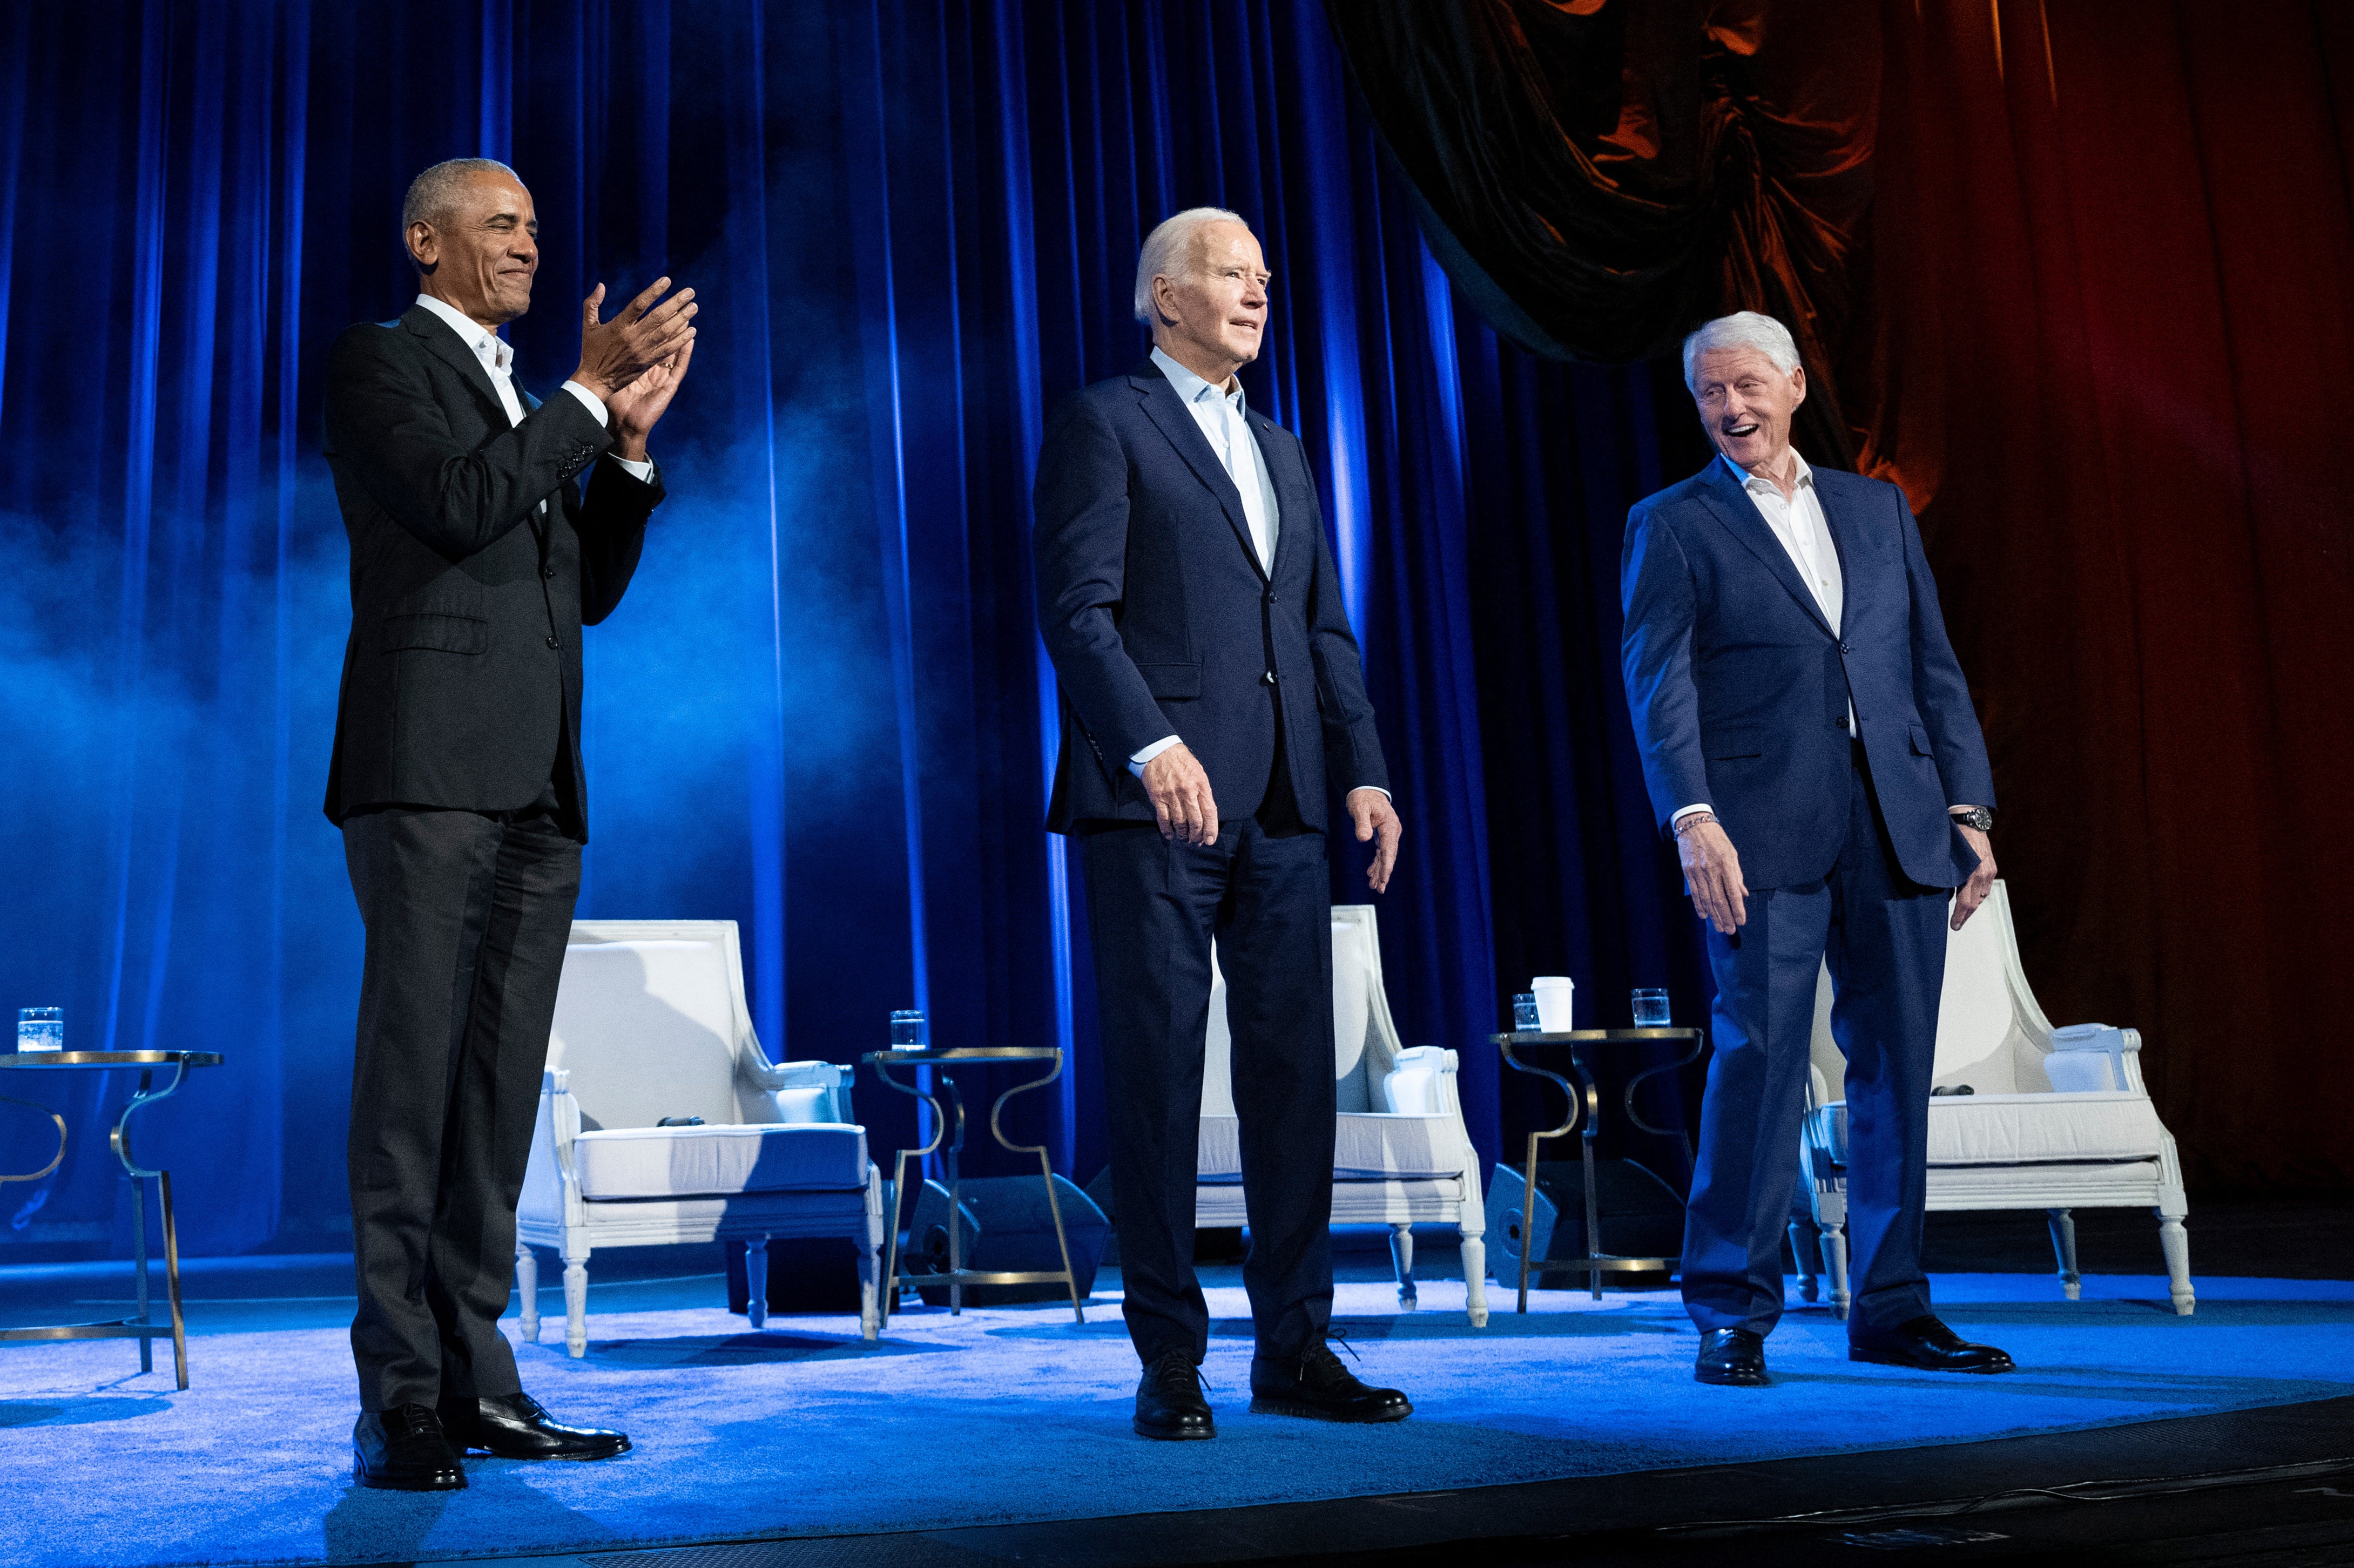 Barack Obama and Bill Clinton helped raise money for the Biden campaign